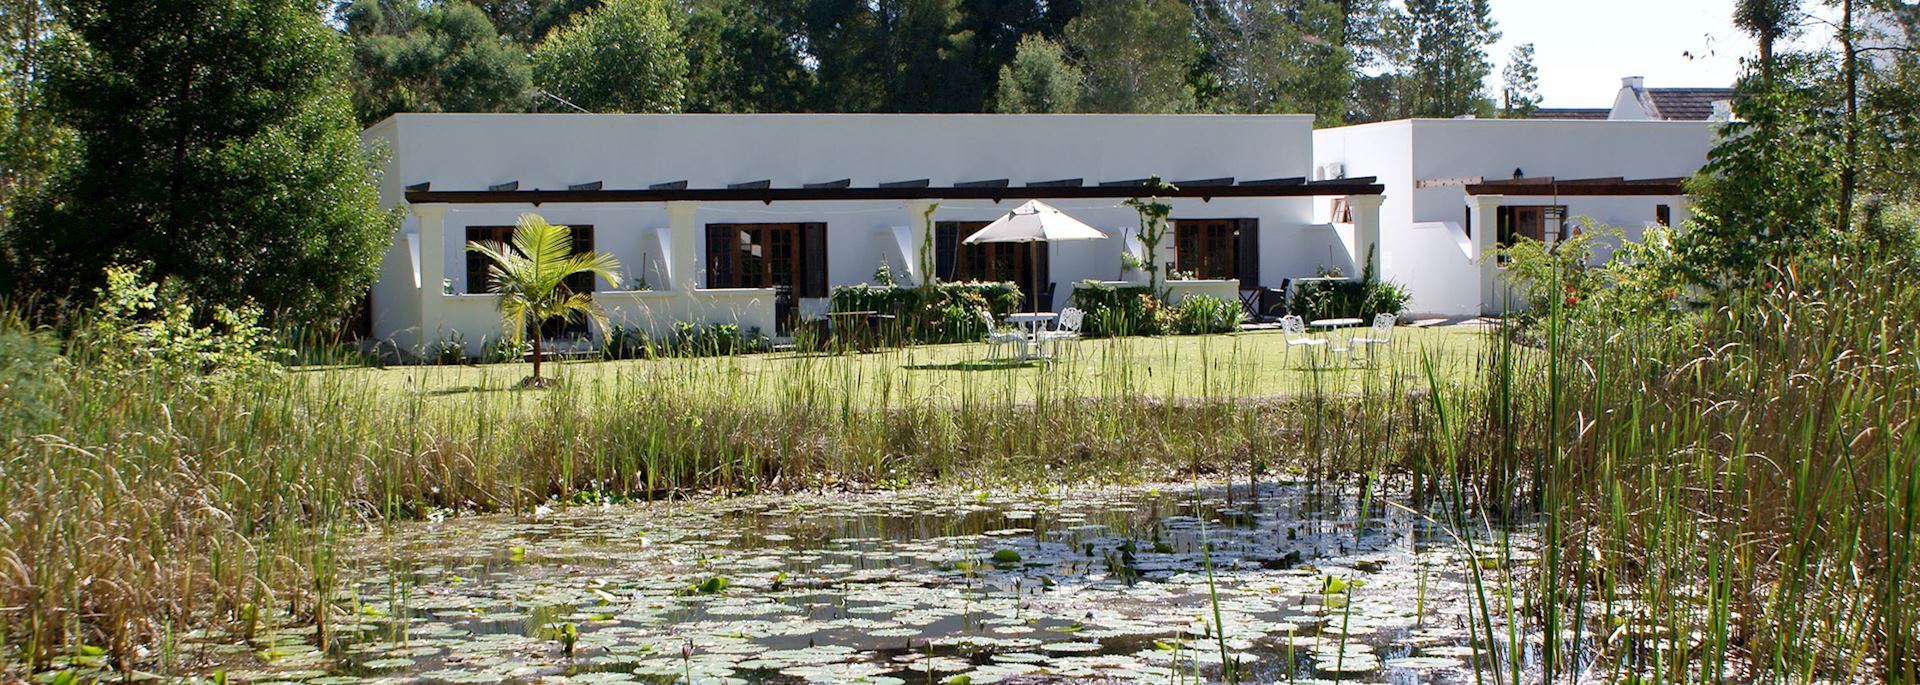 Lairds Lodge, South Africa